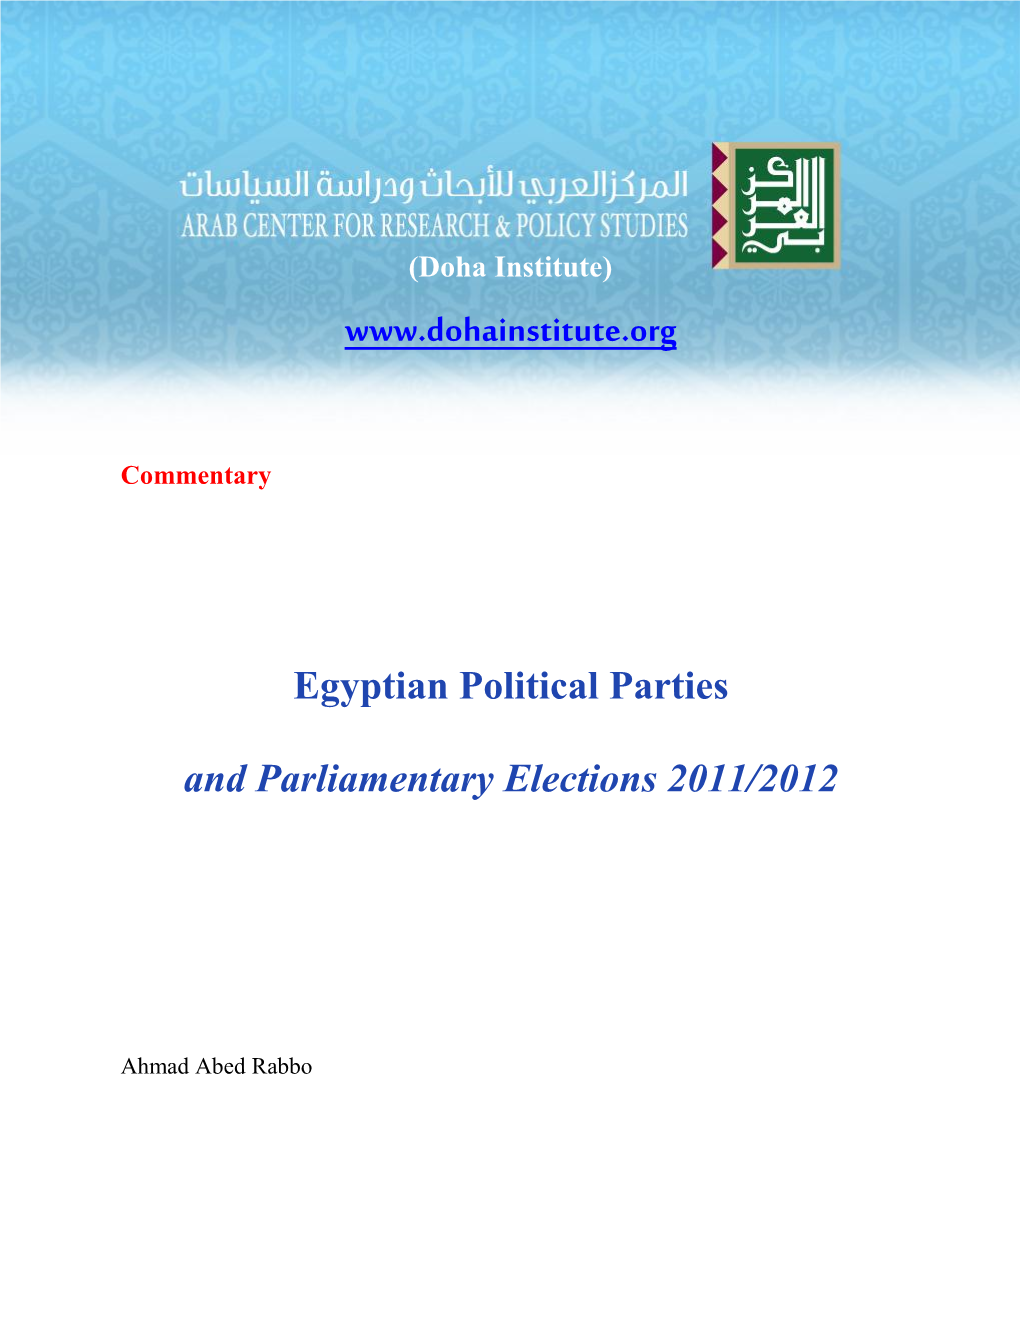 Egyptian Political Parties and